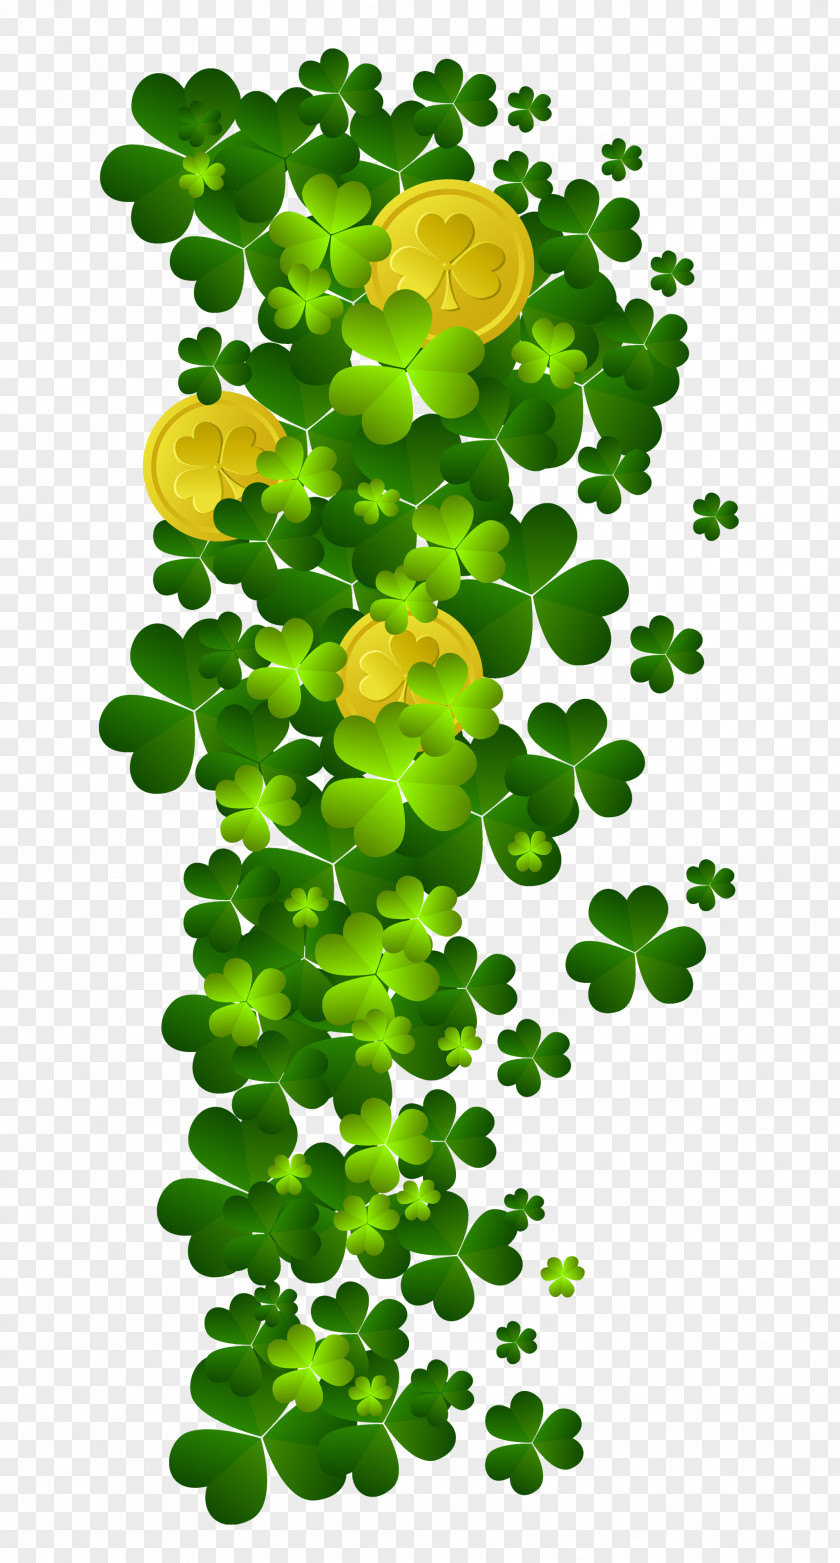 St Patricks Shamrock With Coins PNG Clipart Saint Patrick's Day Clip Art PNG